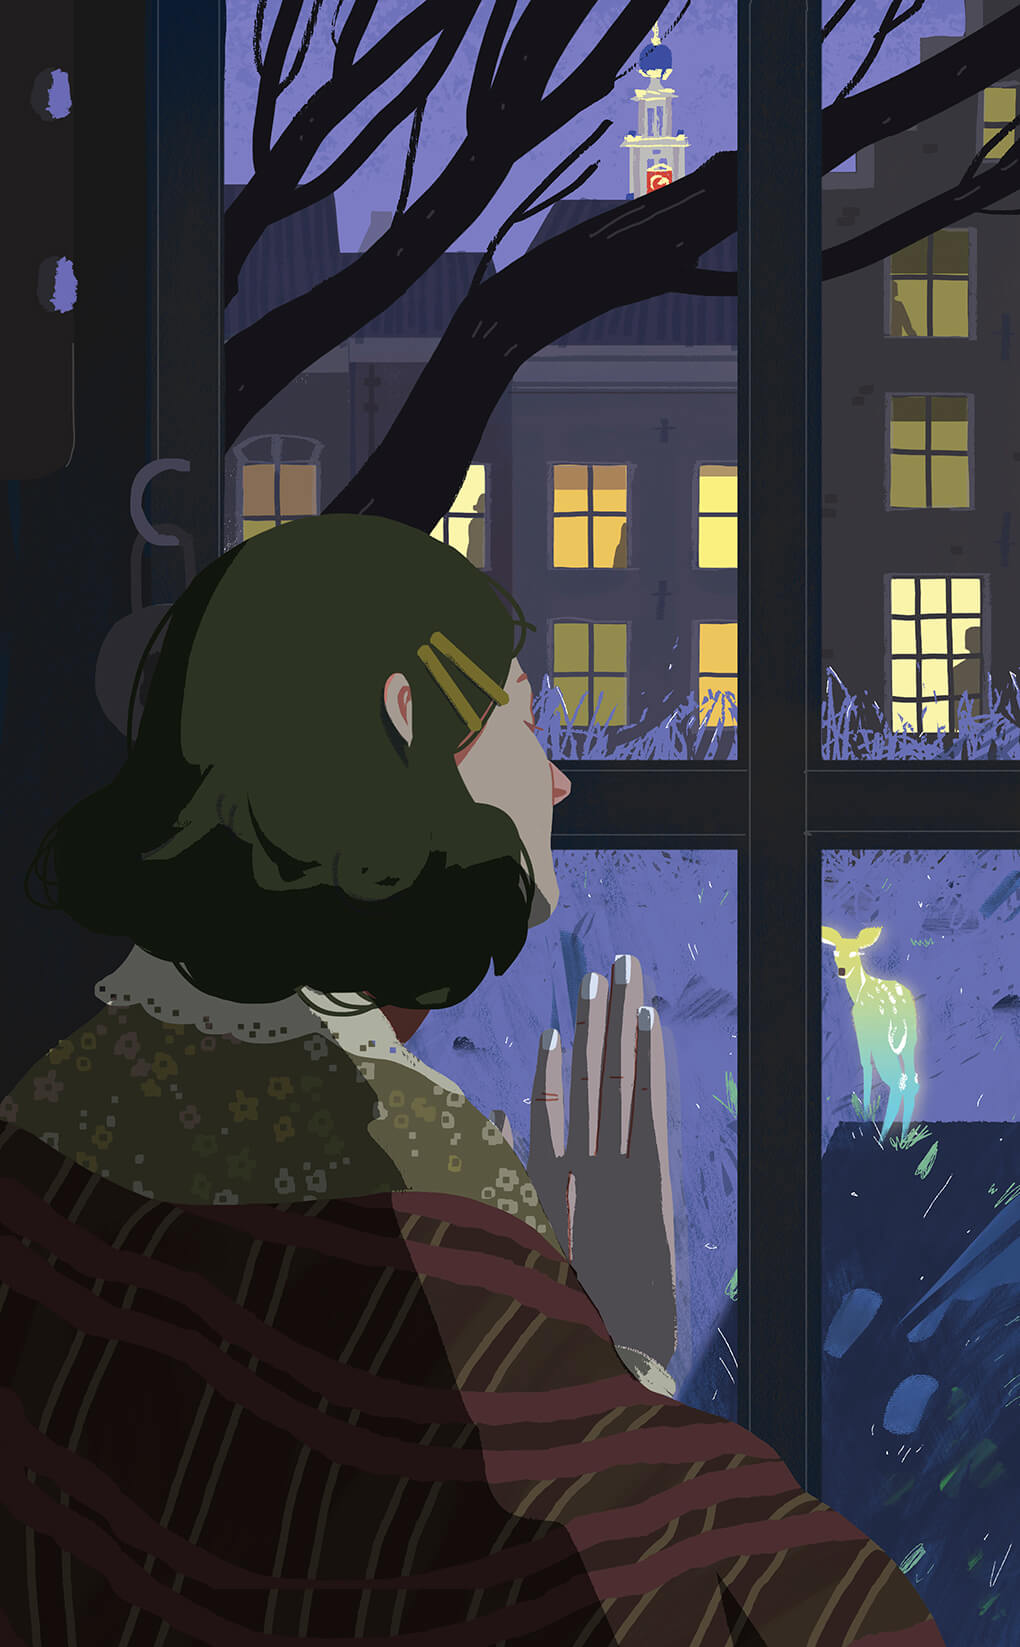 Anne at the windowof her hiding place in the night, imagines a deer in the garden